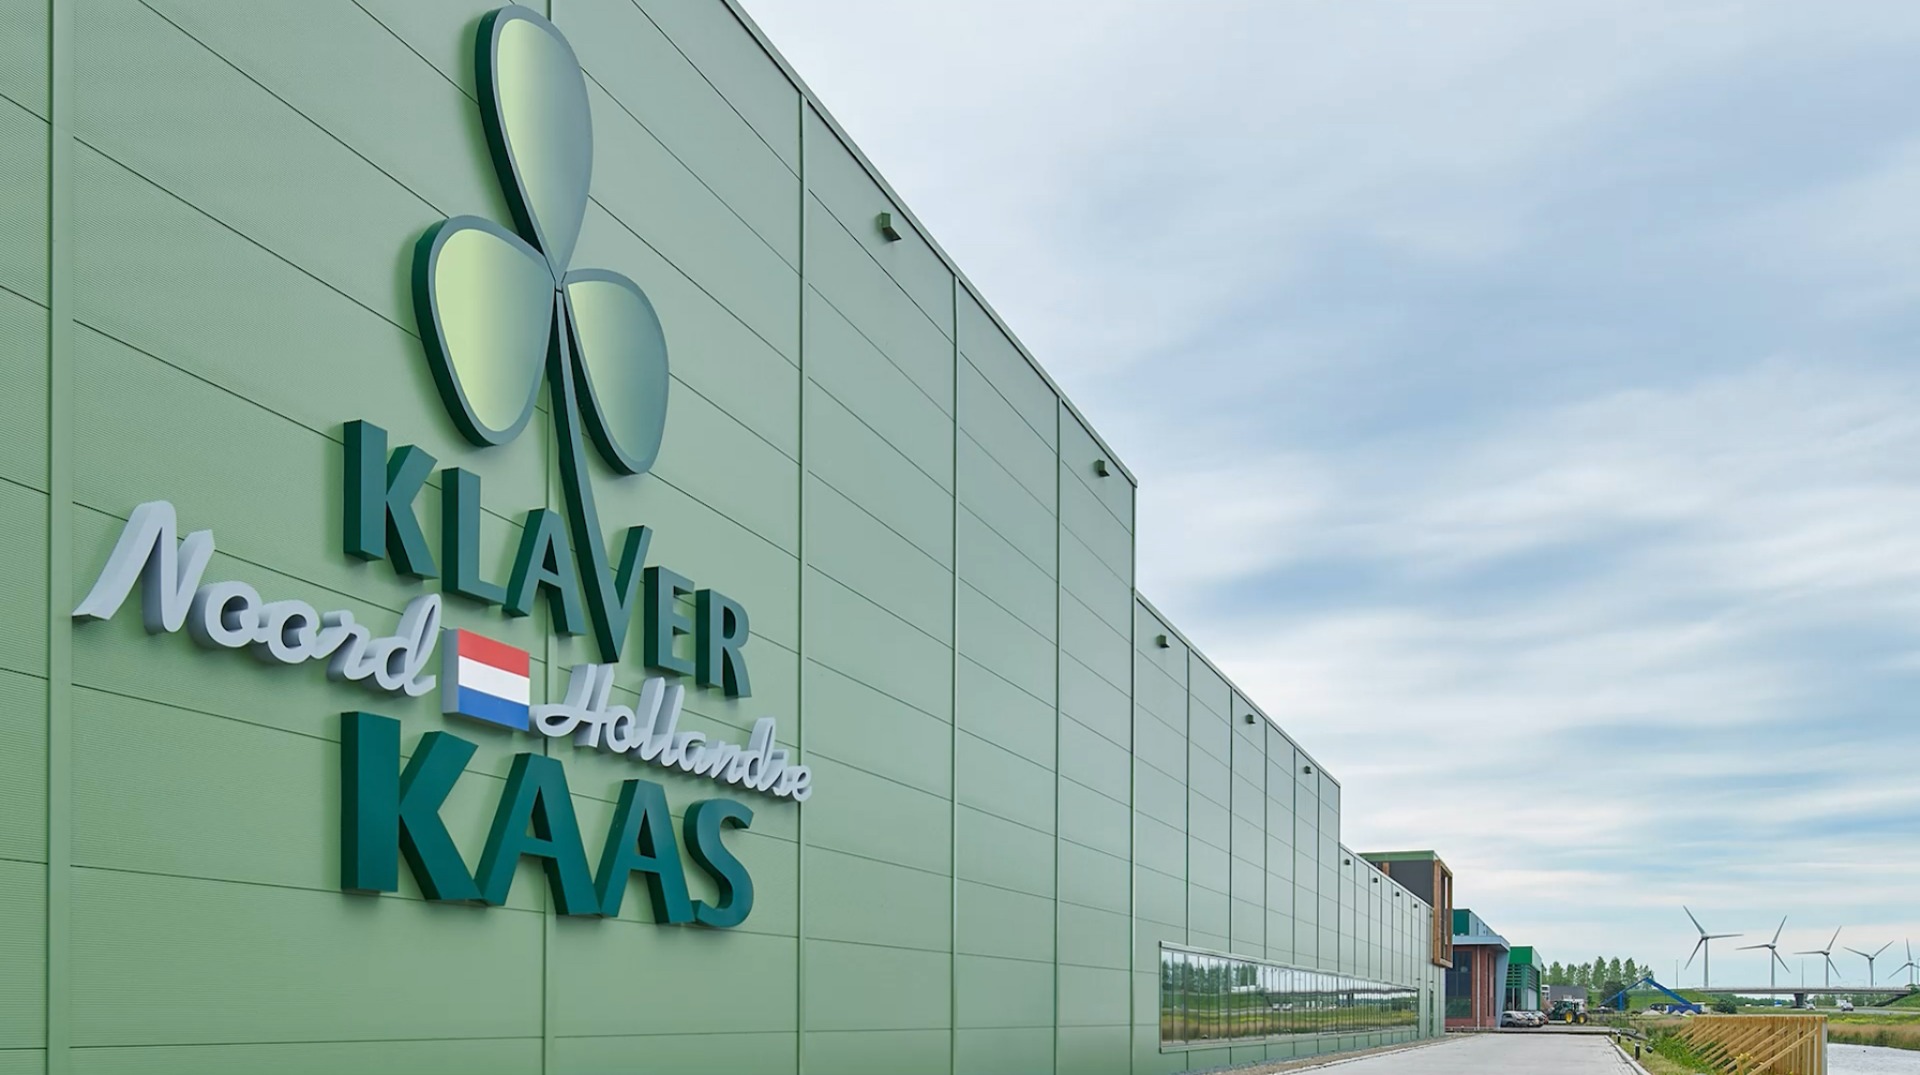 Klaverkaas - The experience of our customer